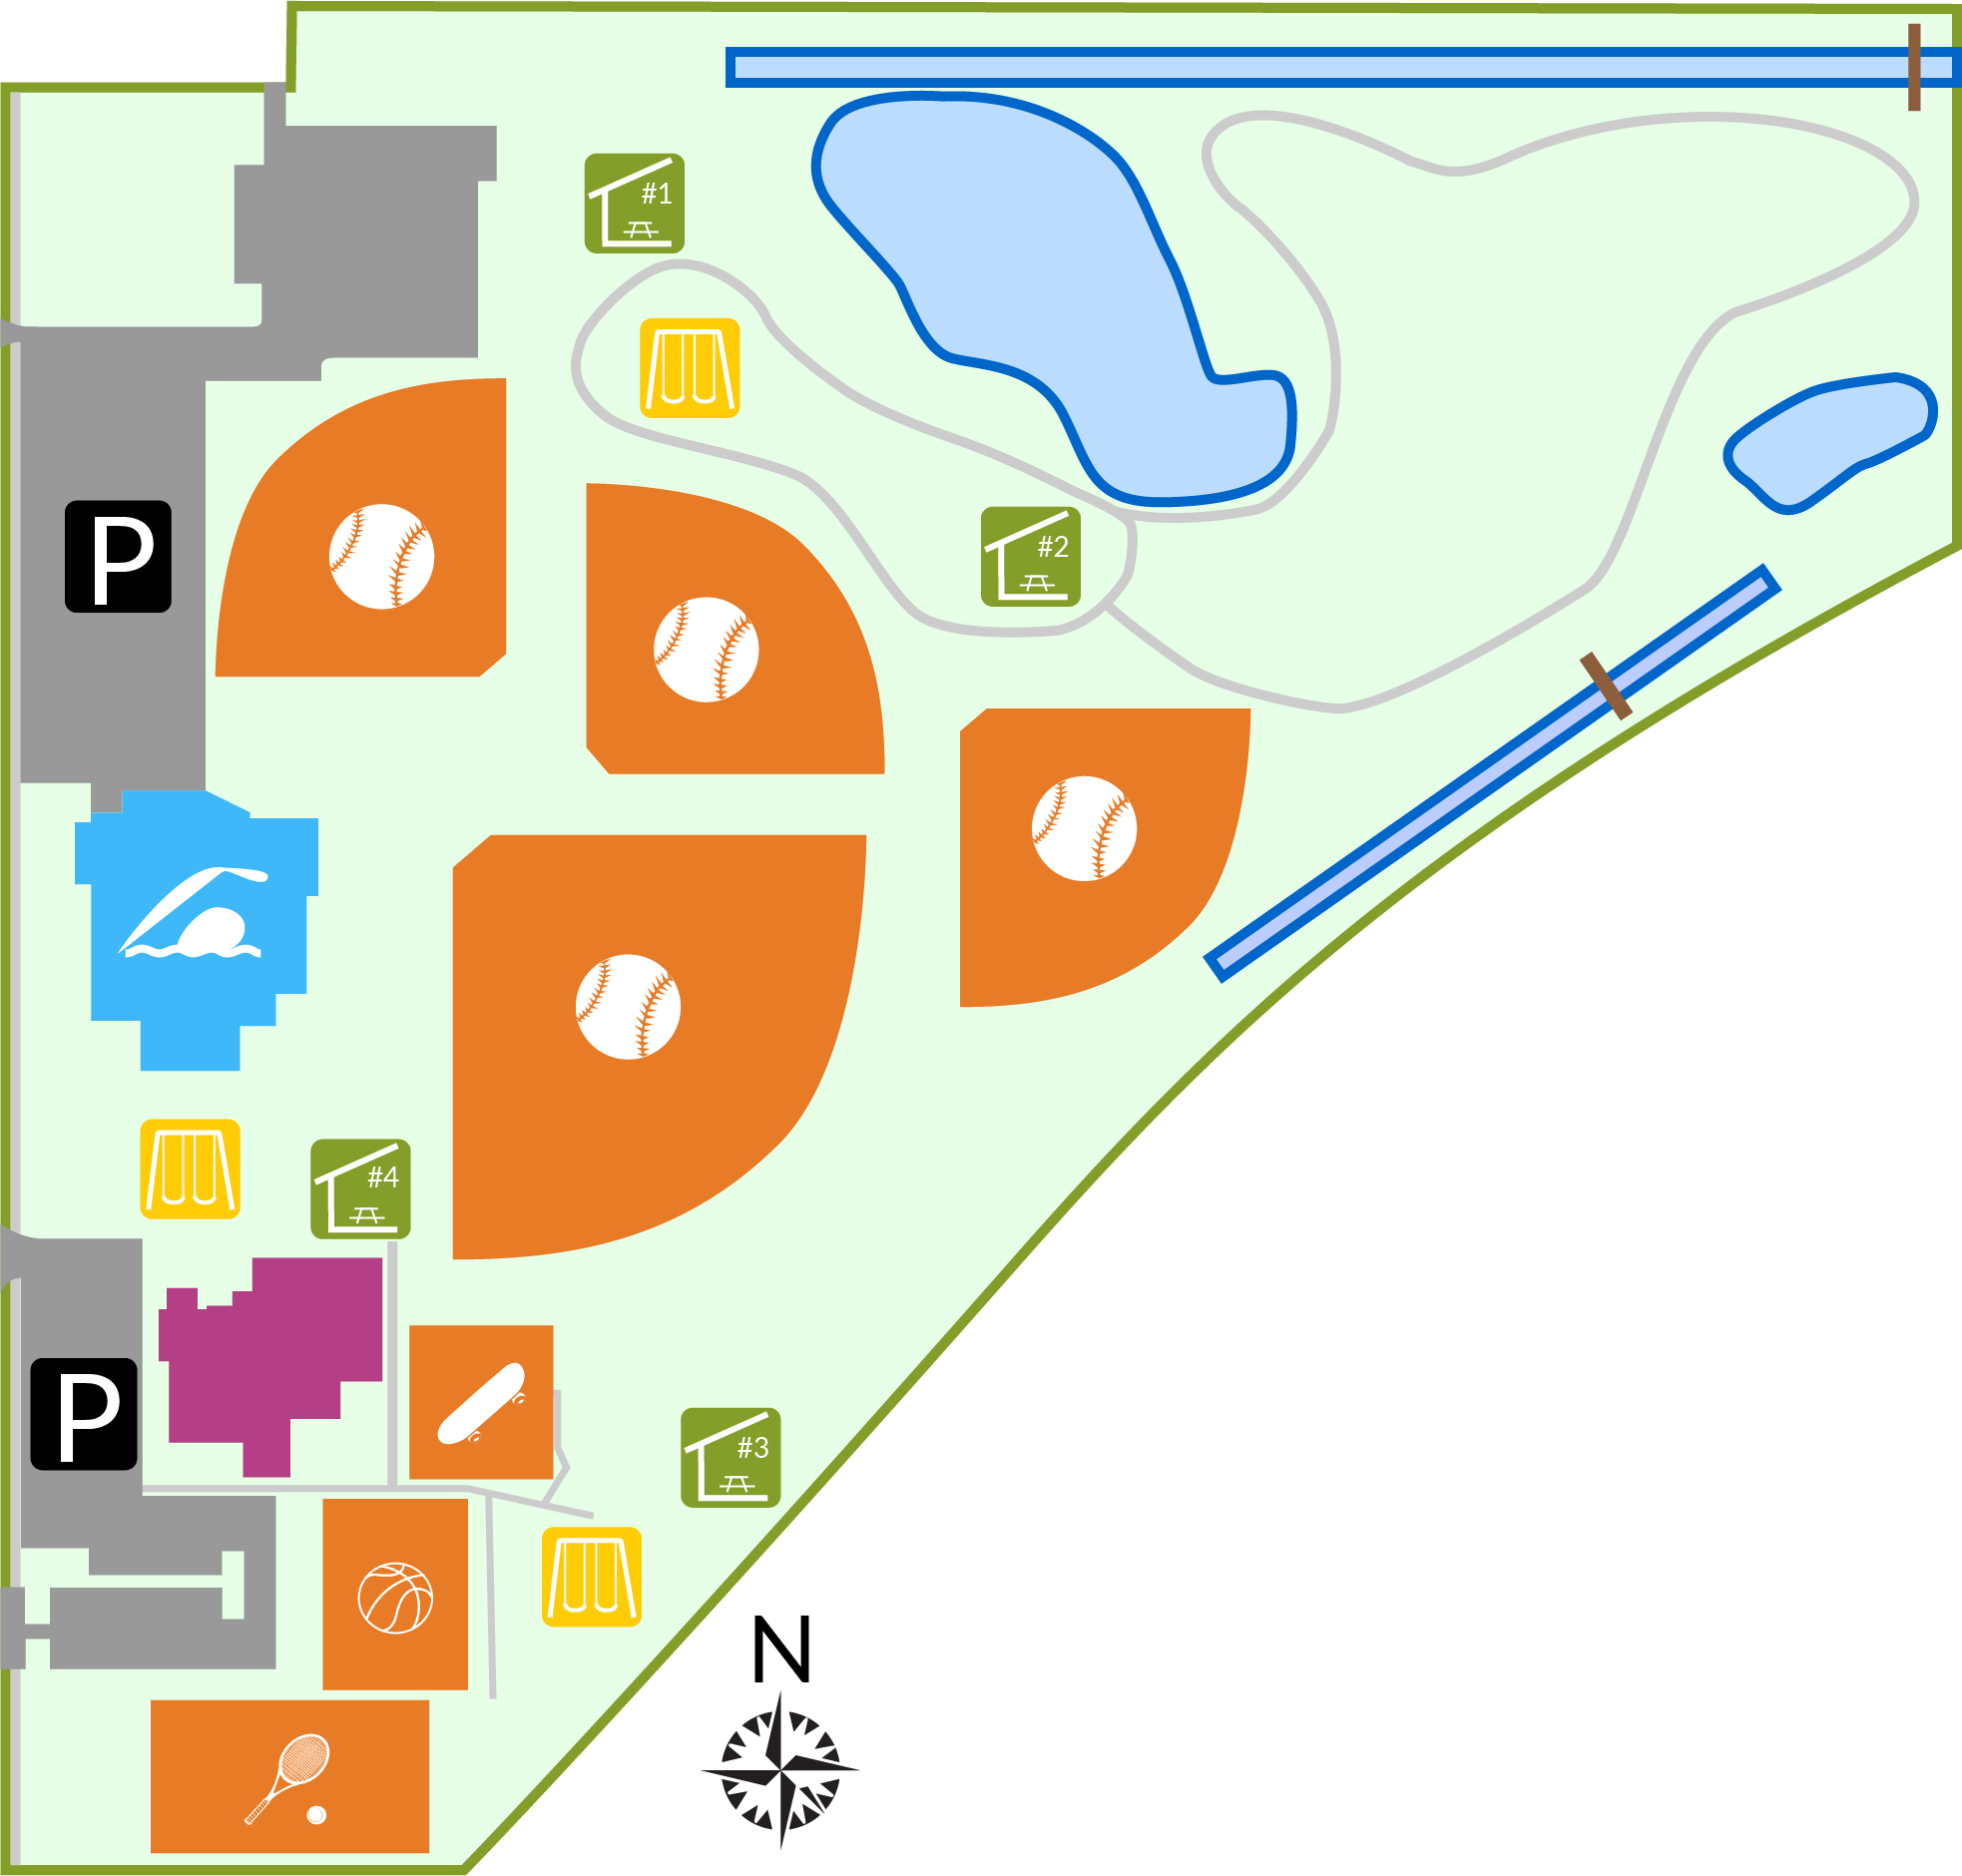 Fossil Park Campus Map